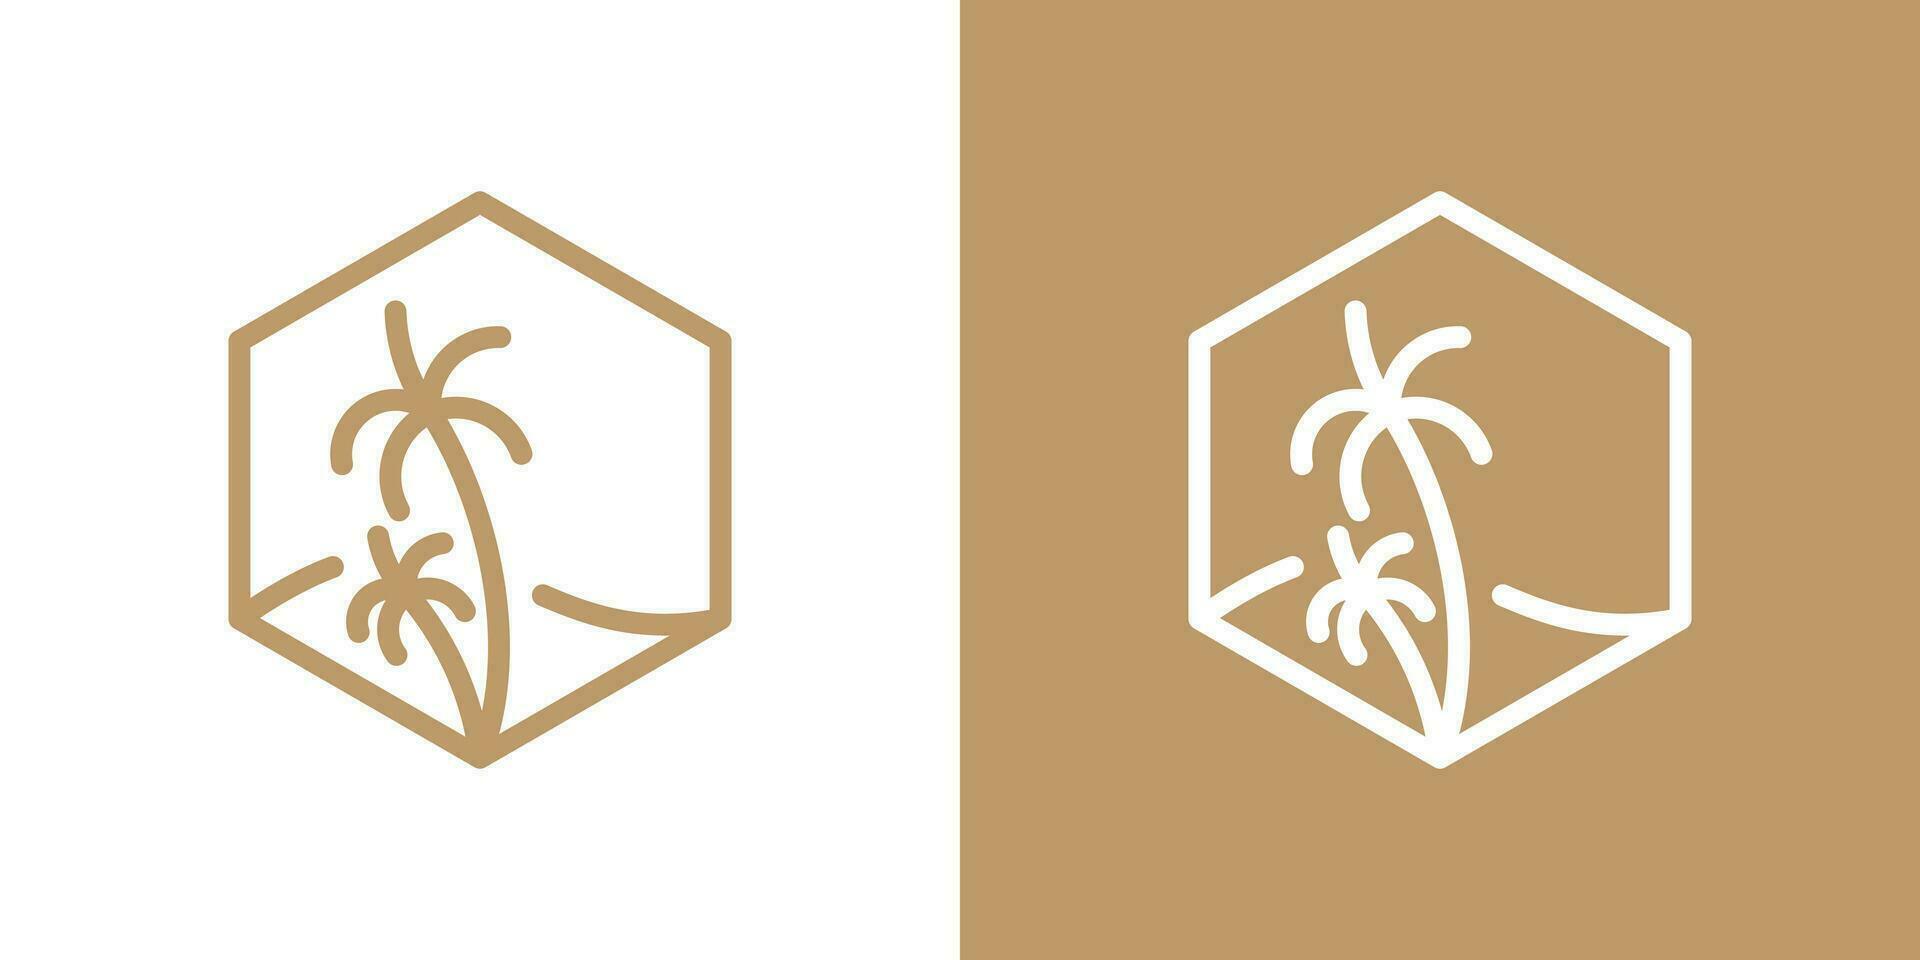 palm tree inspired logo design made in a minimalist line style. vector